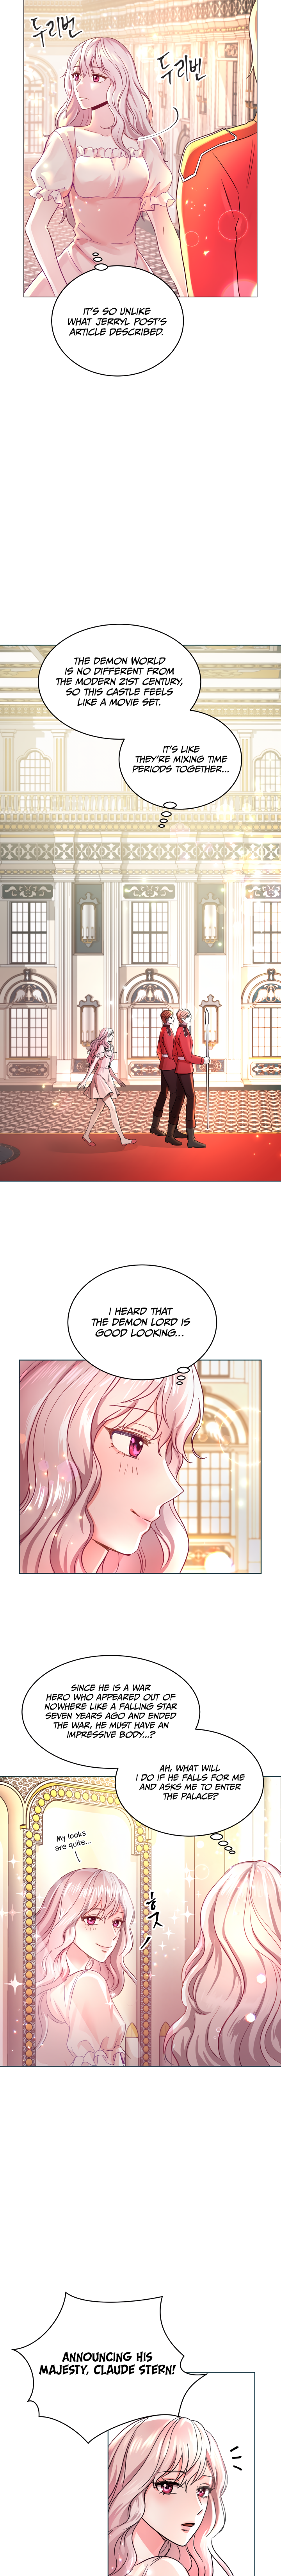 Demon Lord’s 5500 Shadows chapter 1